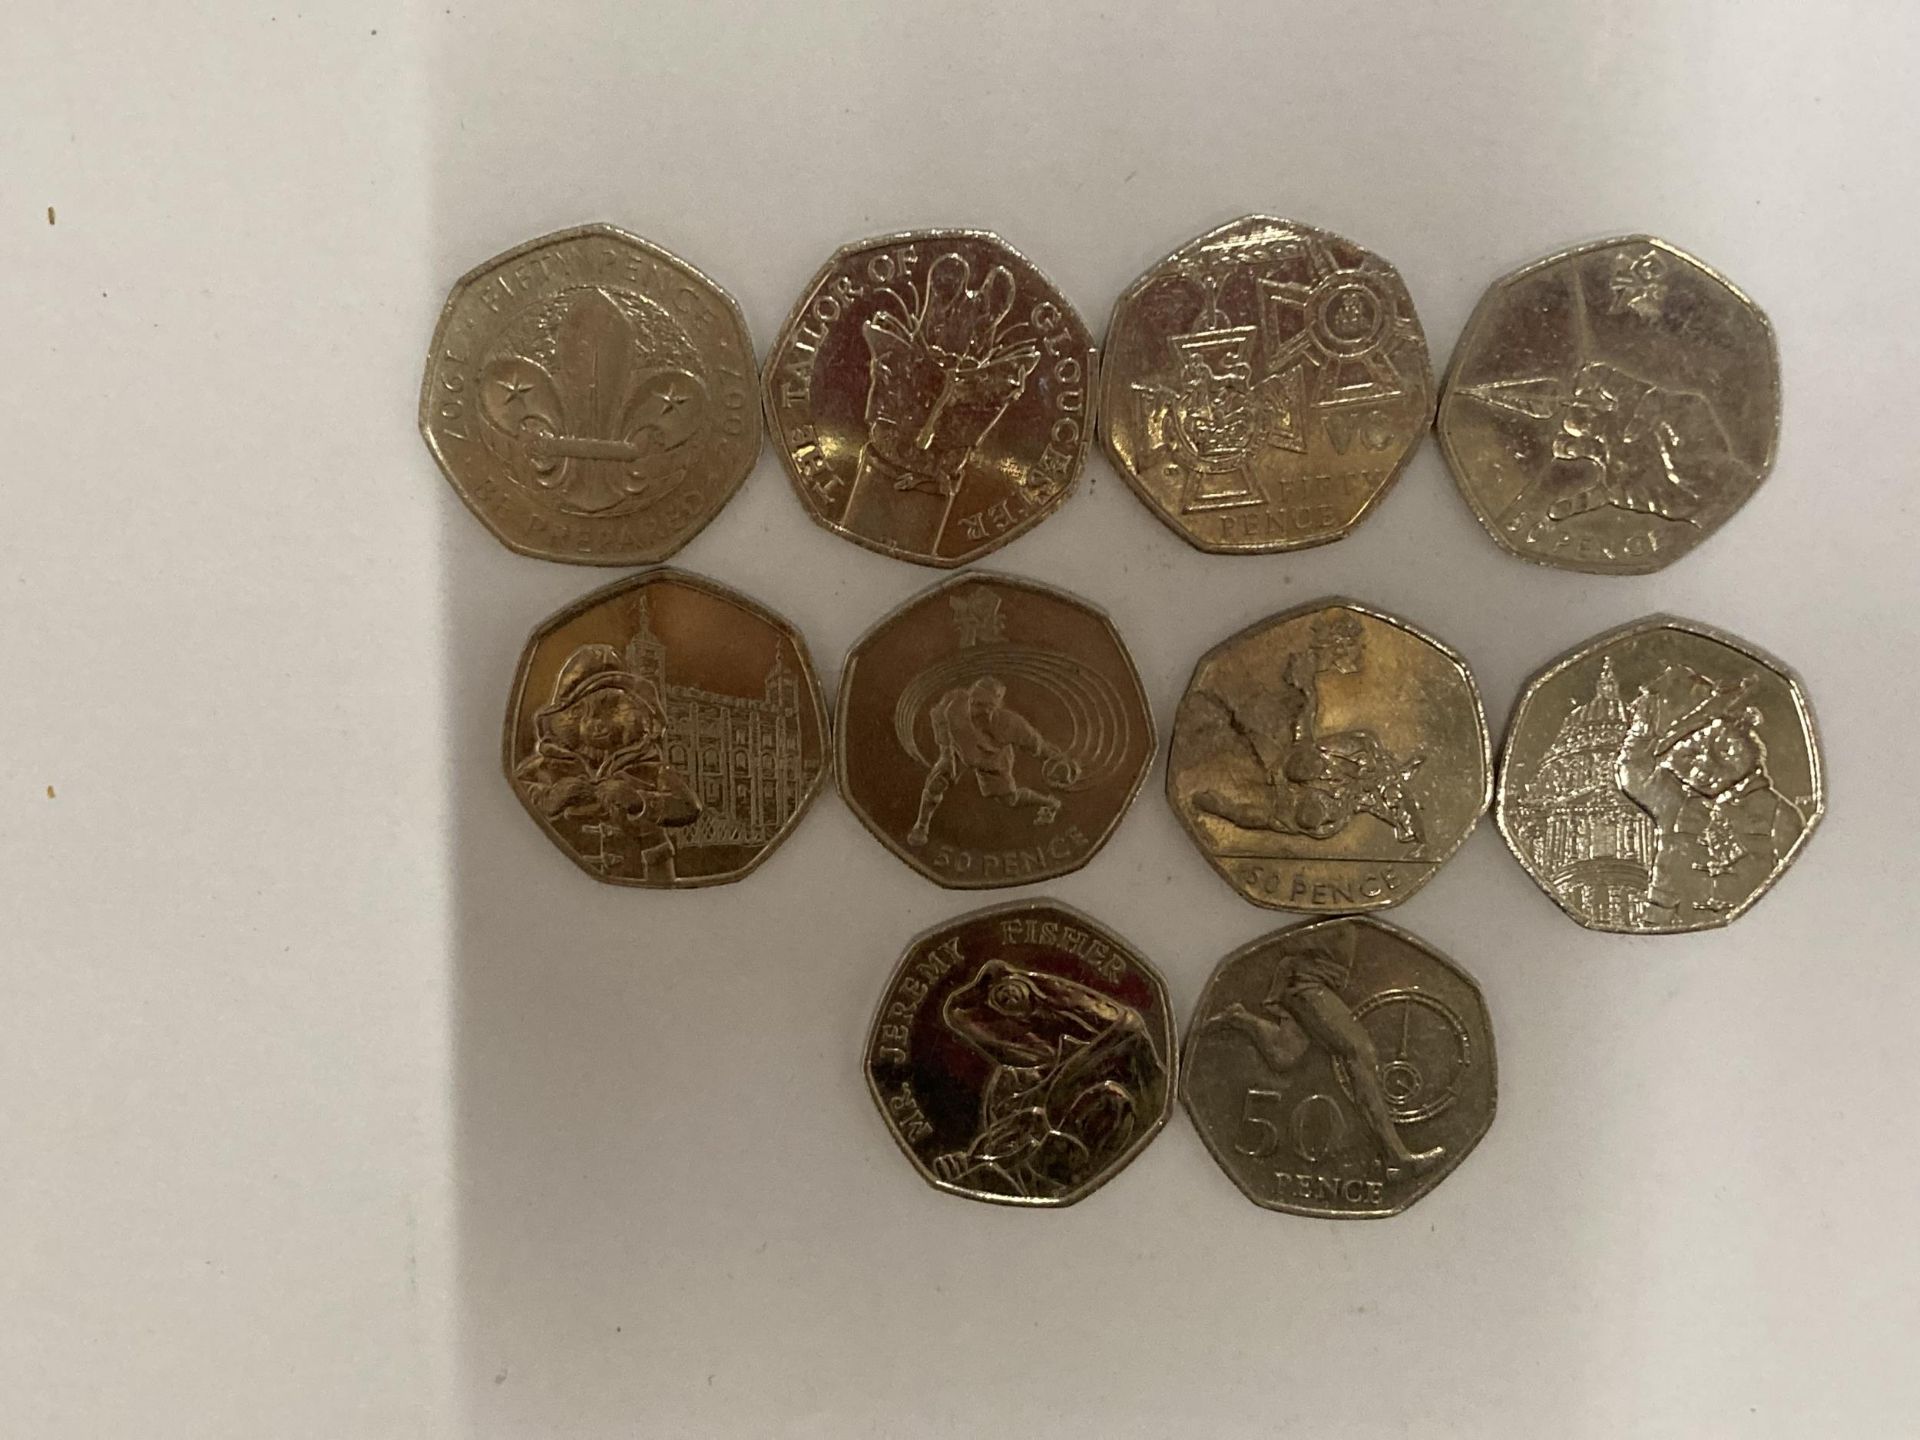 TEN VARIOUS COLLECTABLE FIFTY PENCE PIECES TO INCLUDE PADDINGTON BEAR, JEREMY FISHER, OLYMPICS ETC